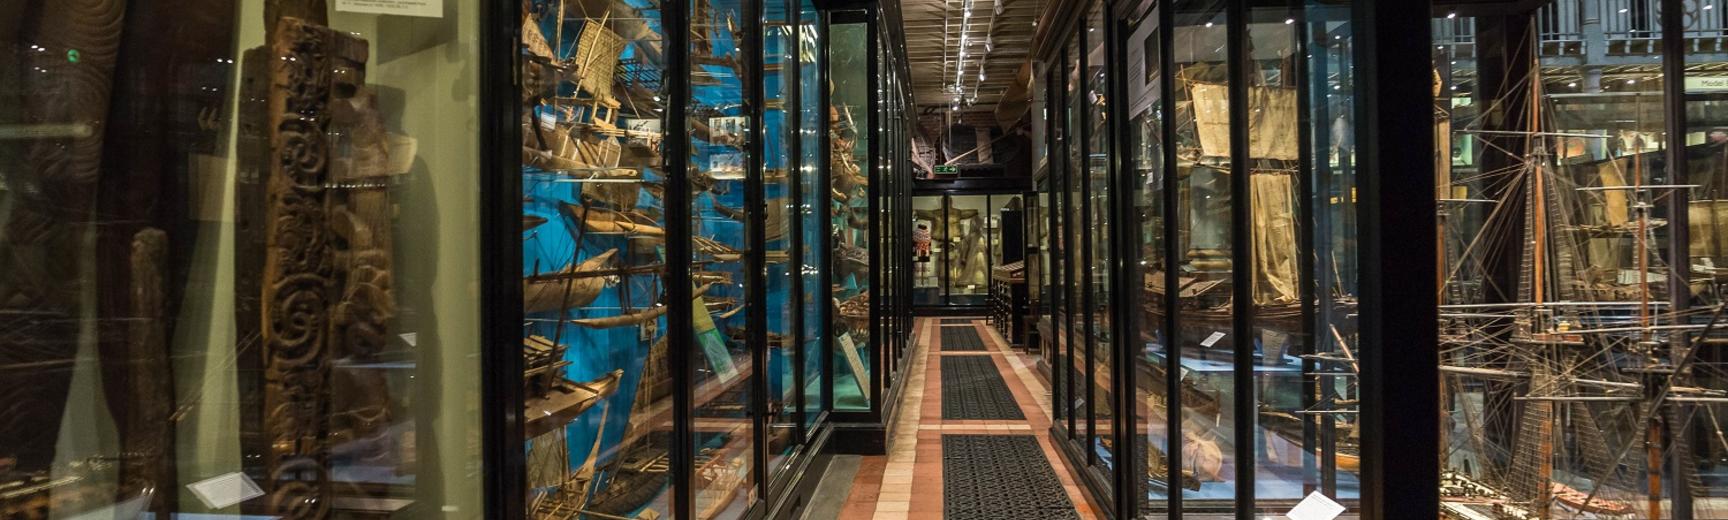 Display cases at the Pitt Rivers Museum